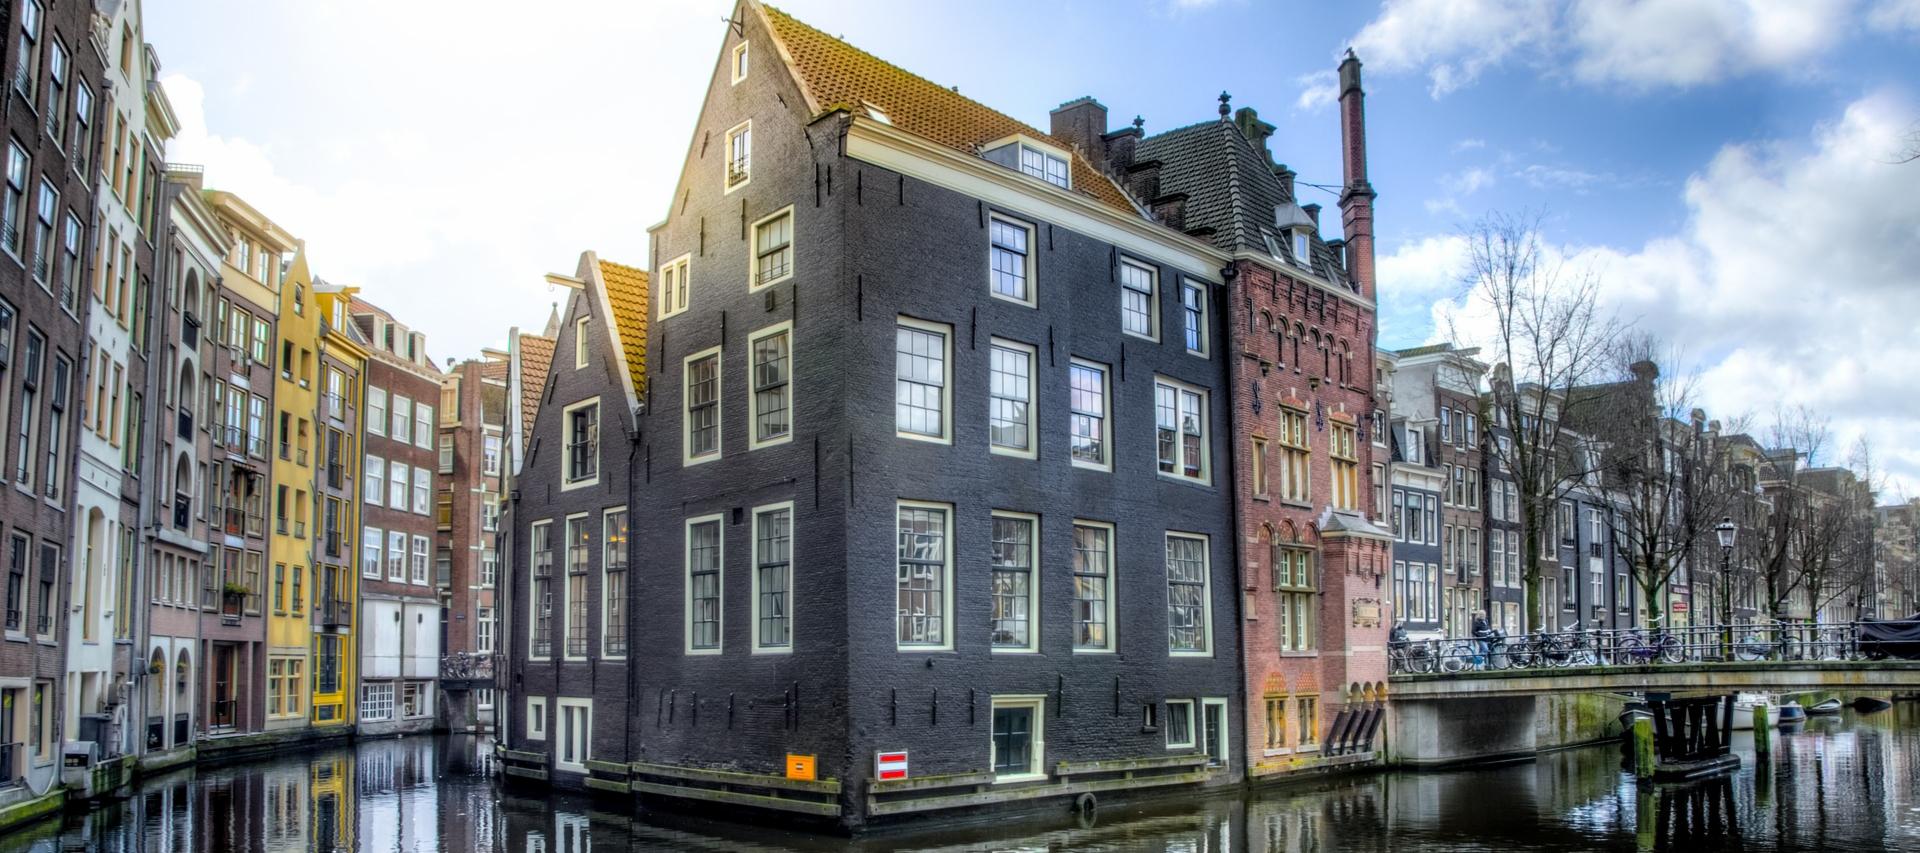 Buildings along canal in Amsterdam